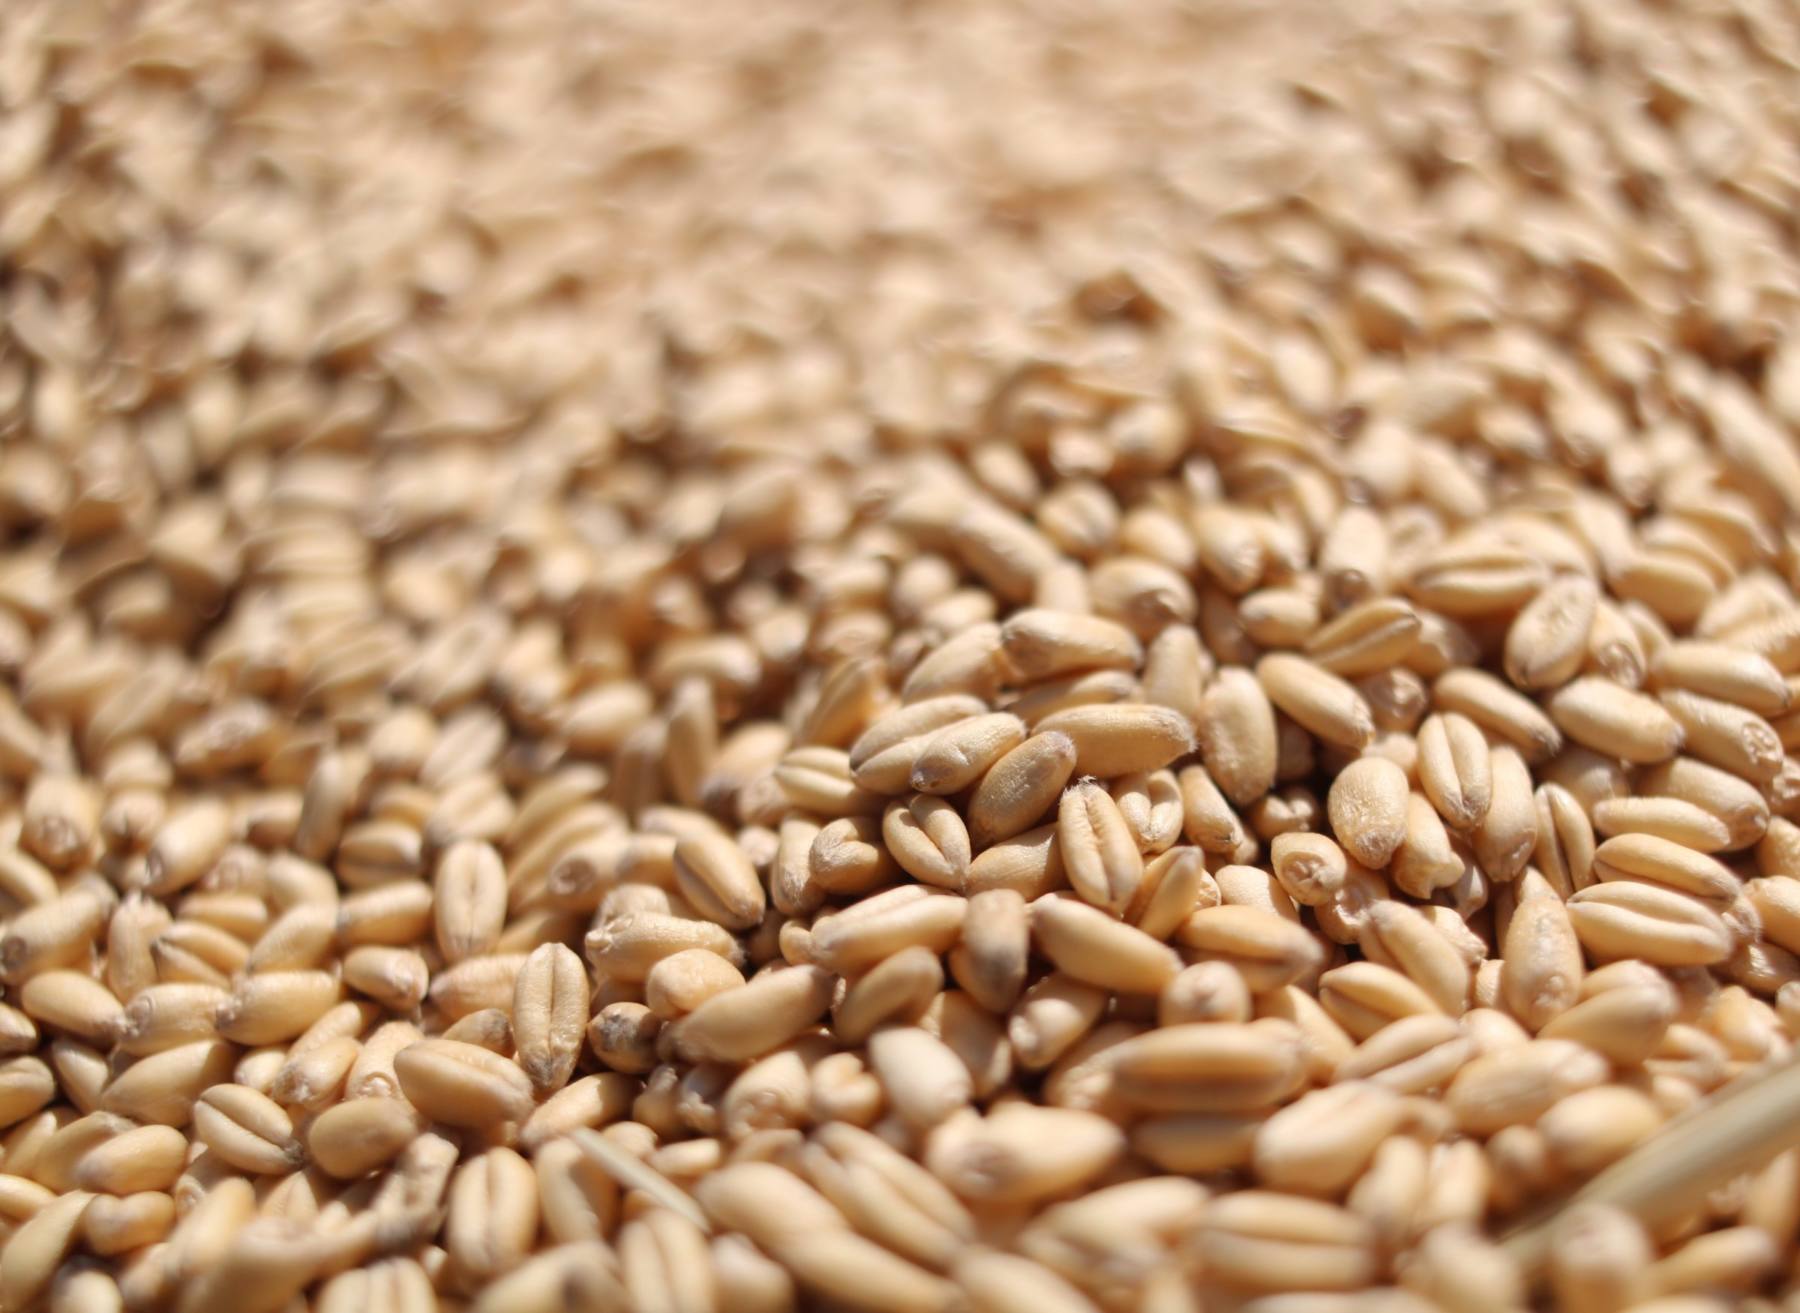 Wheat kernels in a pile.